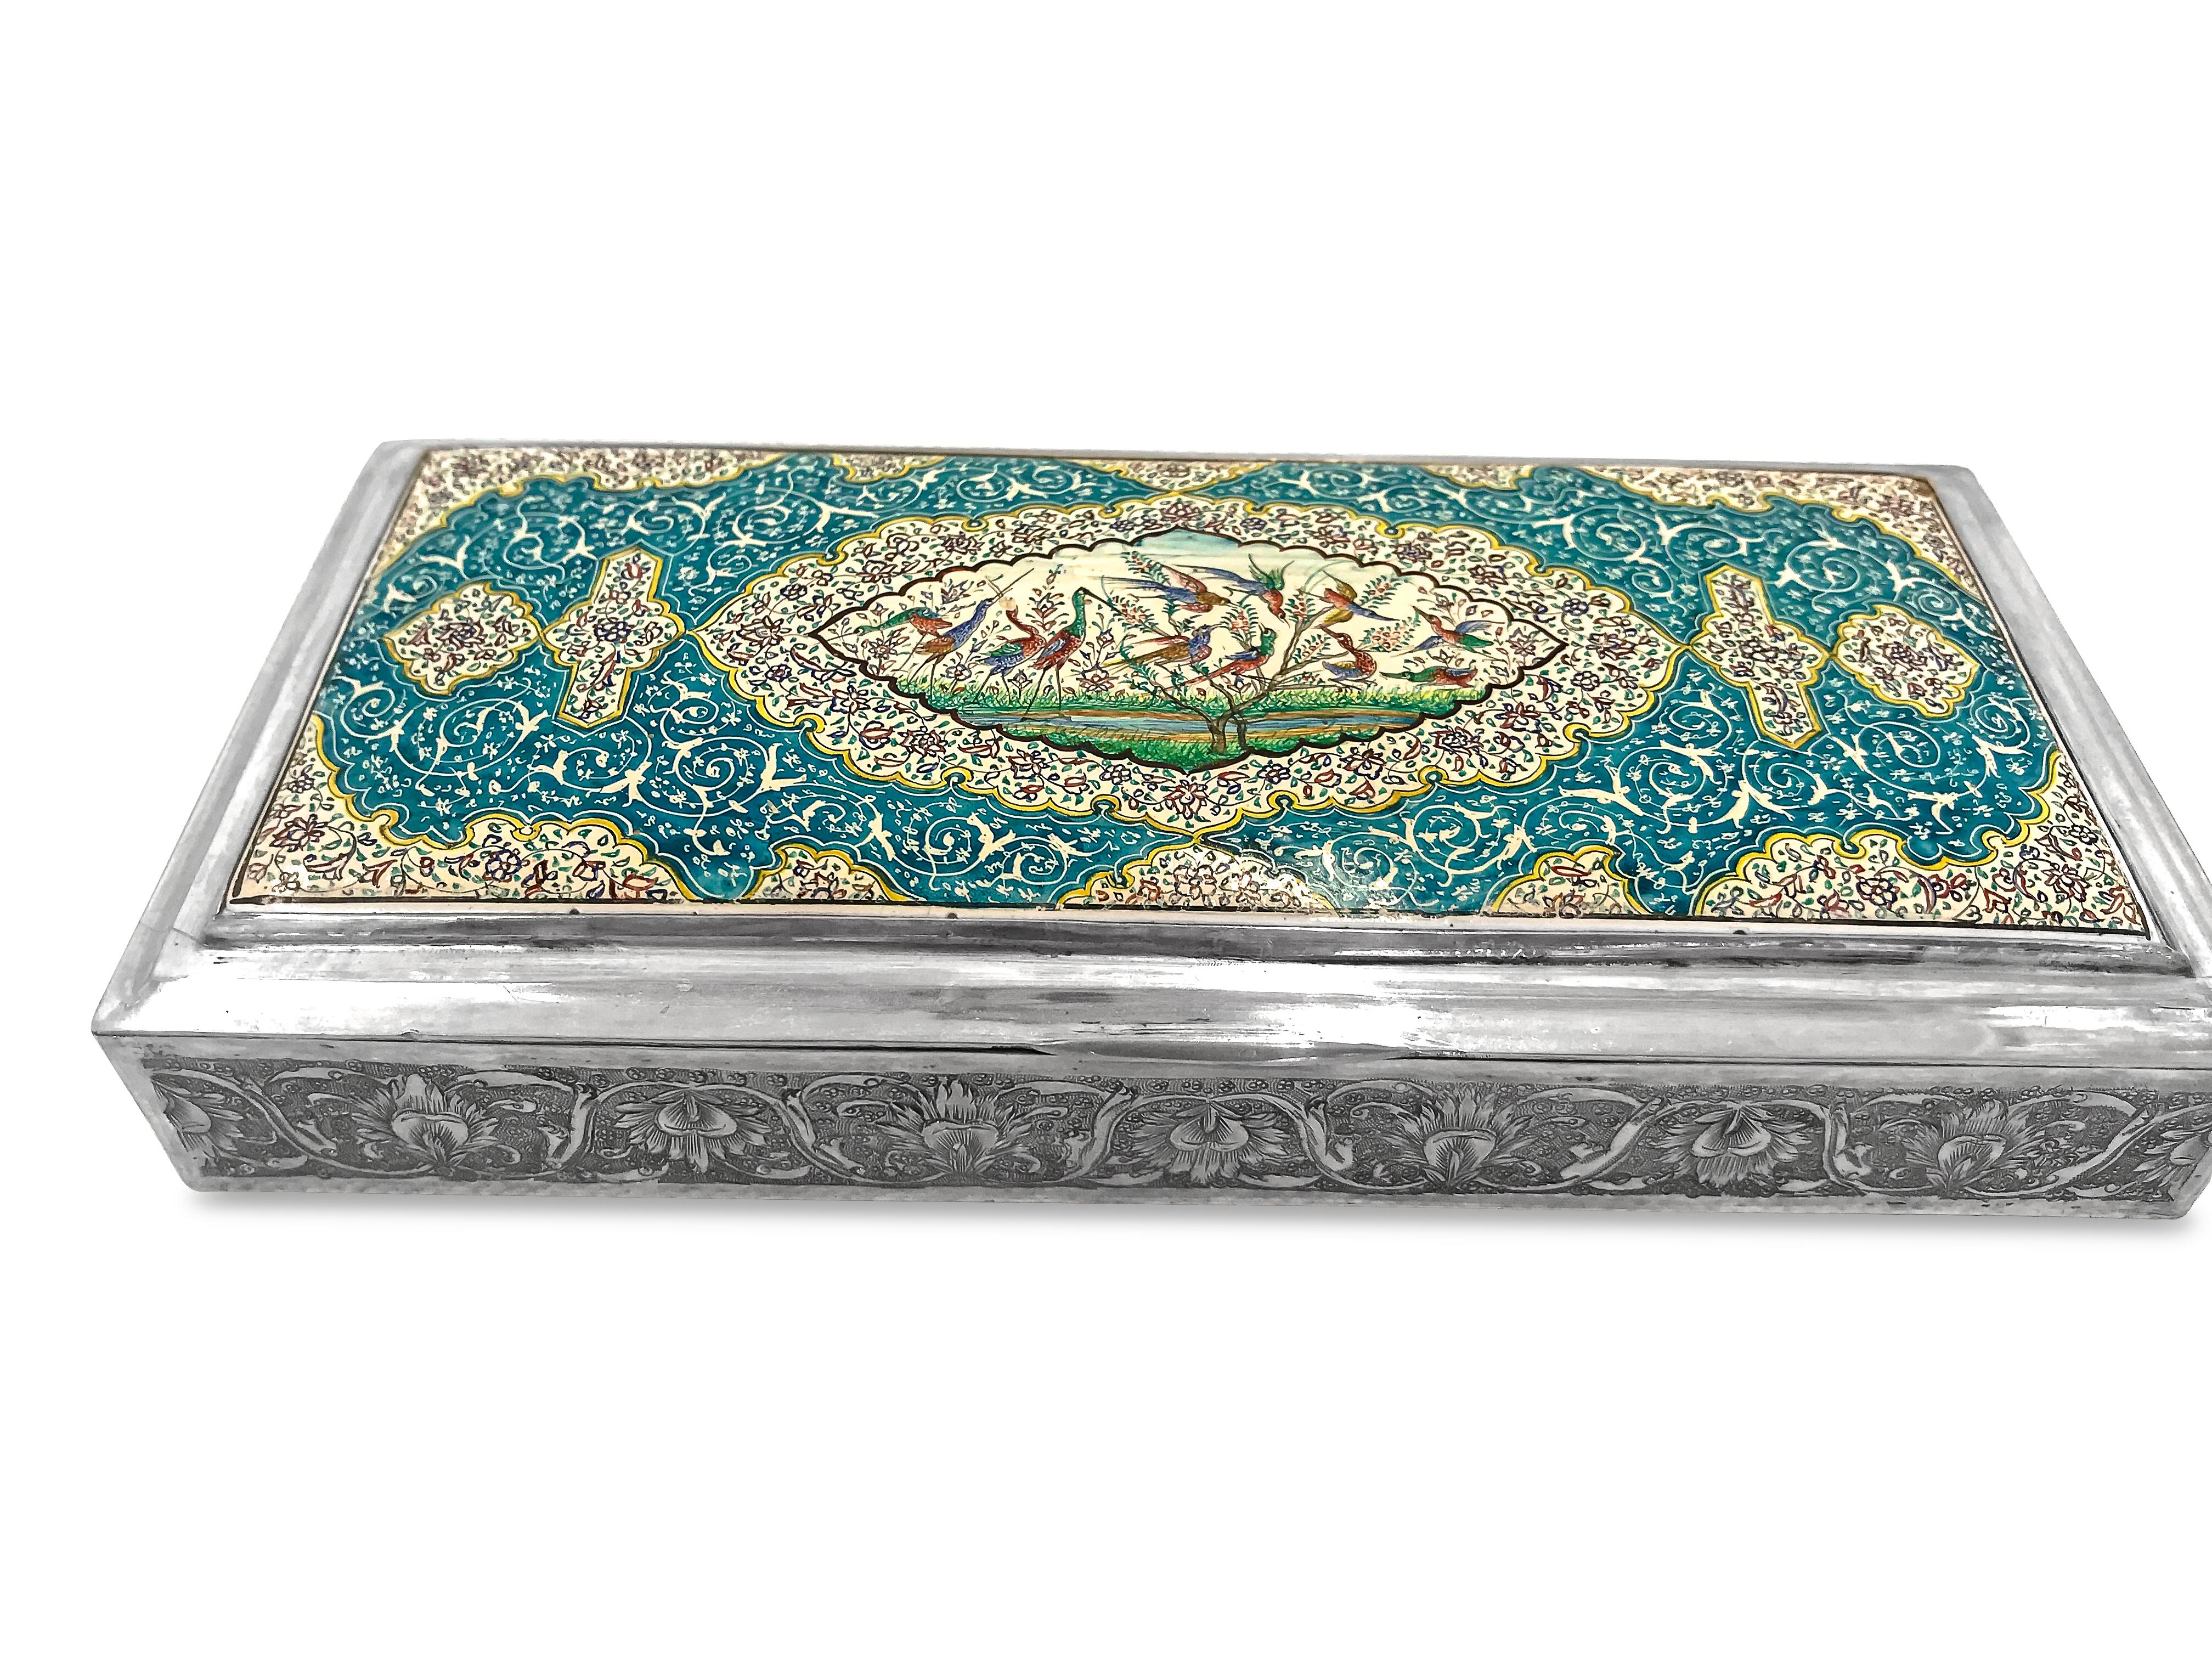 This beautiful enamel box is  absolutely gorgeous and it has been hand carved very delicately. The enamel work on top of the box is hand made too and has blue,red,yellow,green,white and black color .
In the middle part has more painting of storks